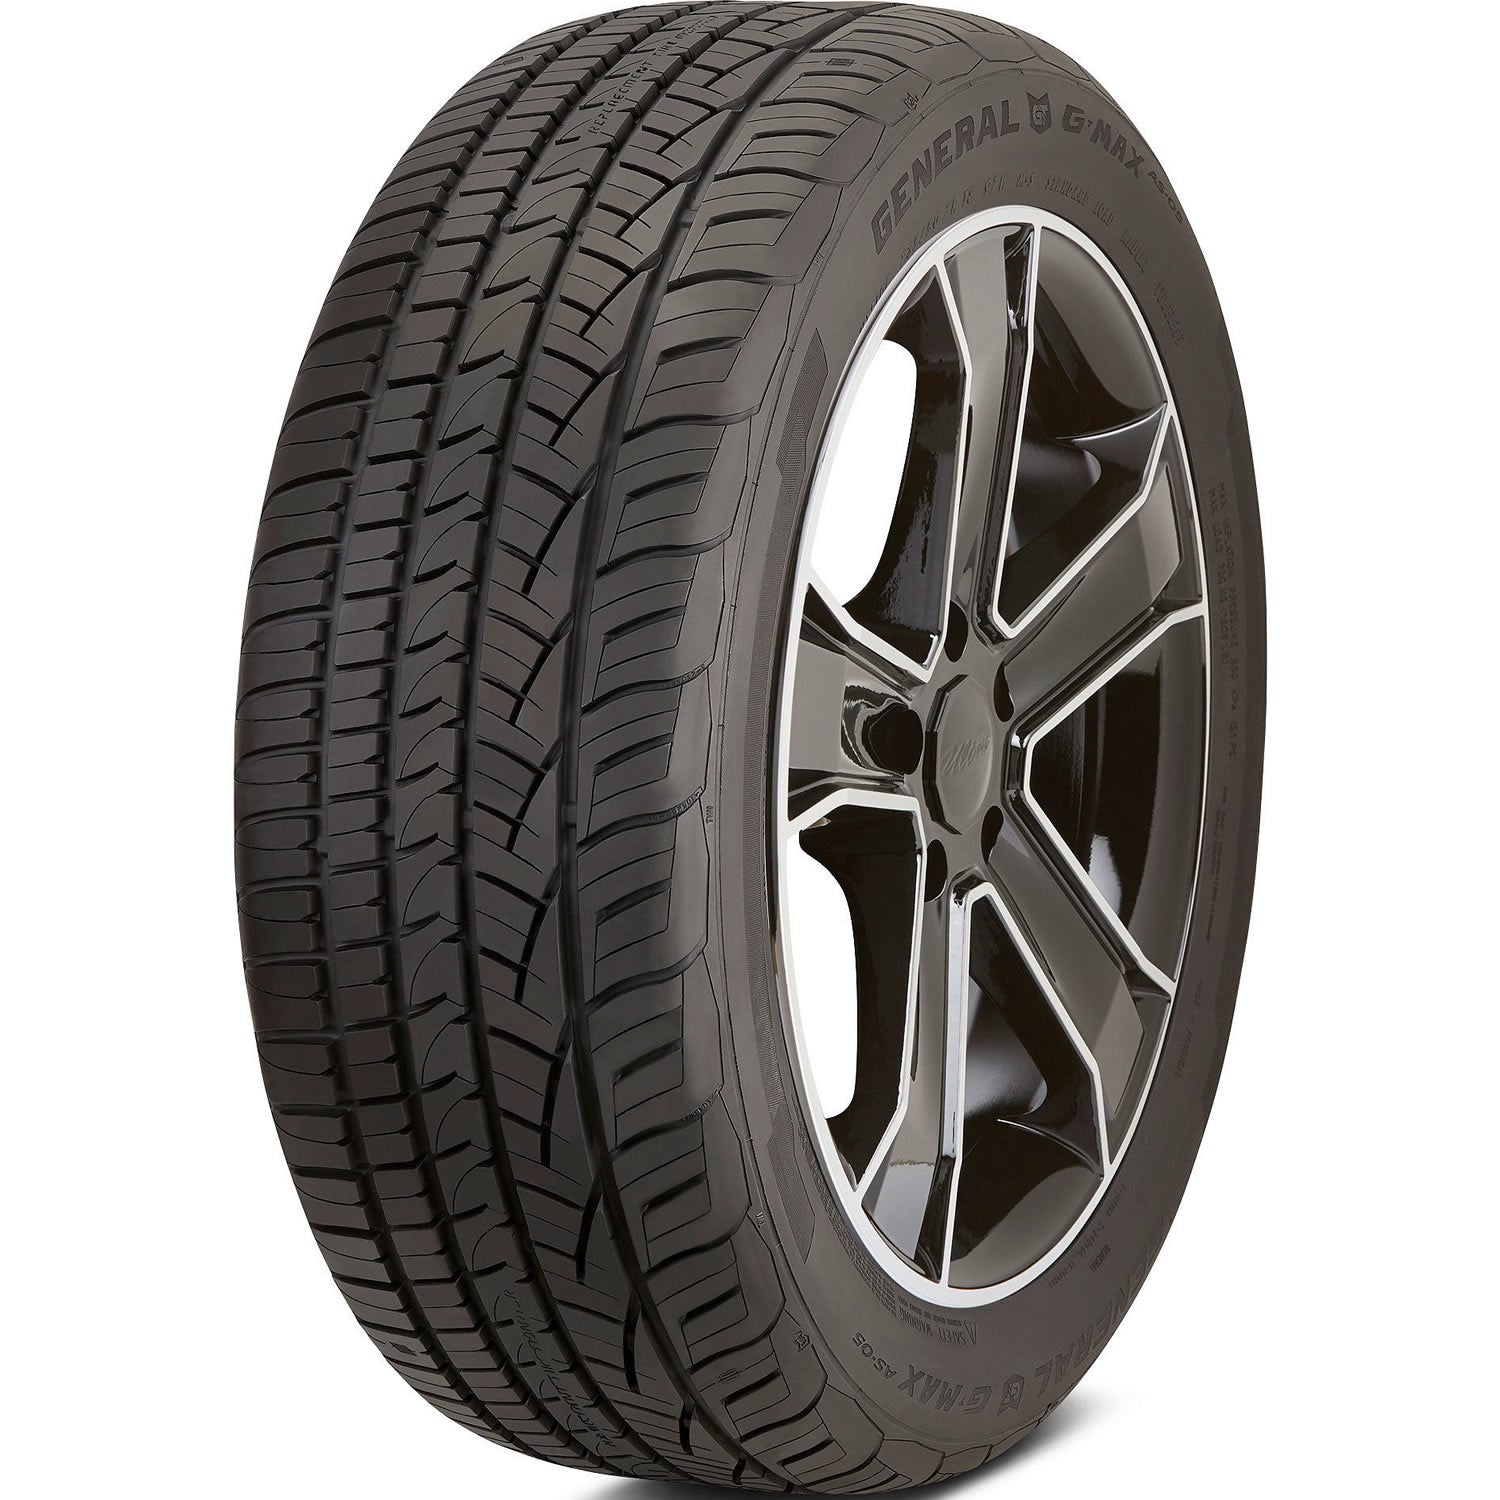 GENERAL G-MAX AS-05 235/45ZR17 (25.3X9.3R 17) Tires